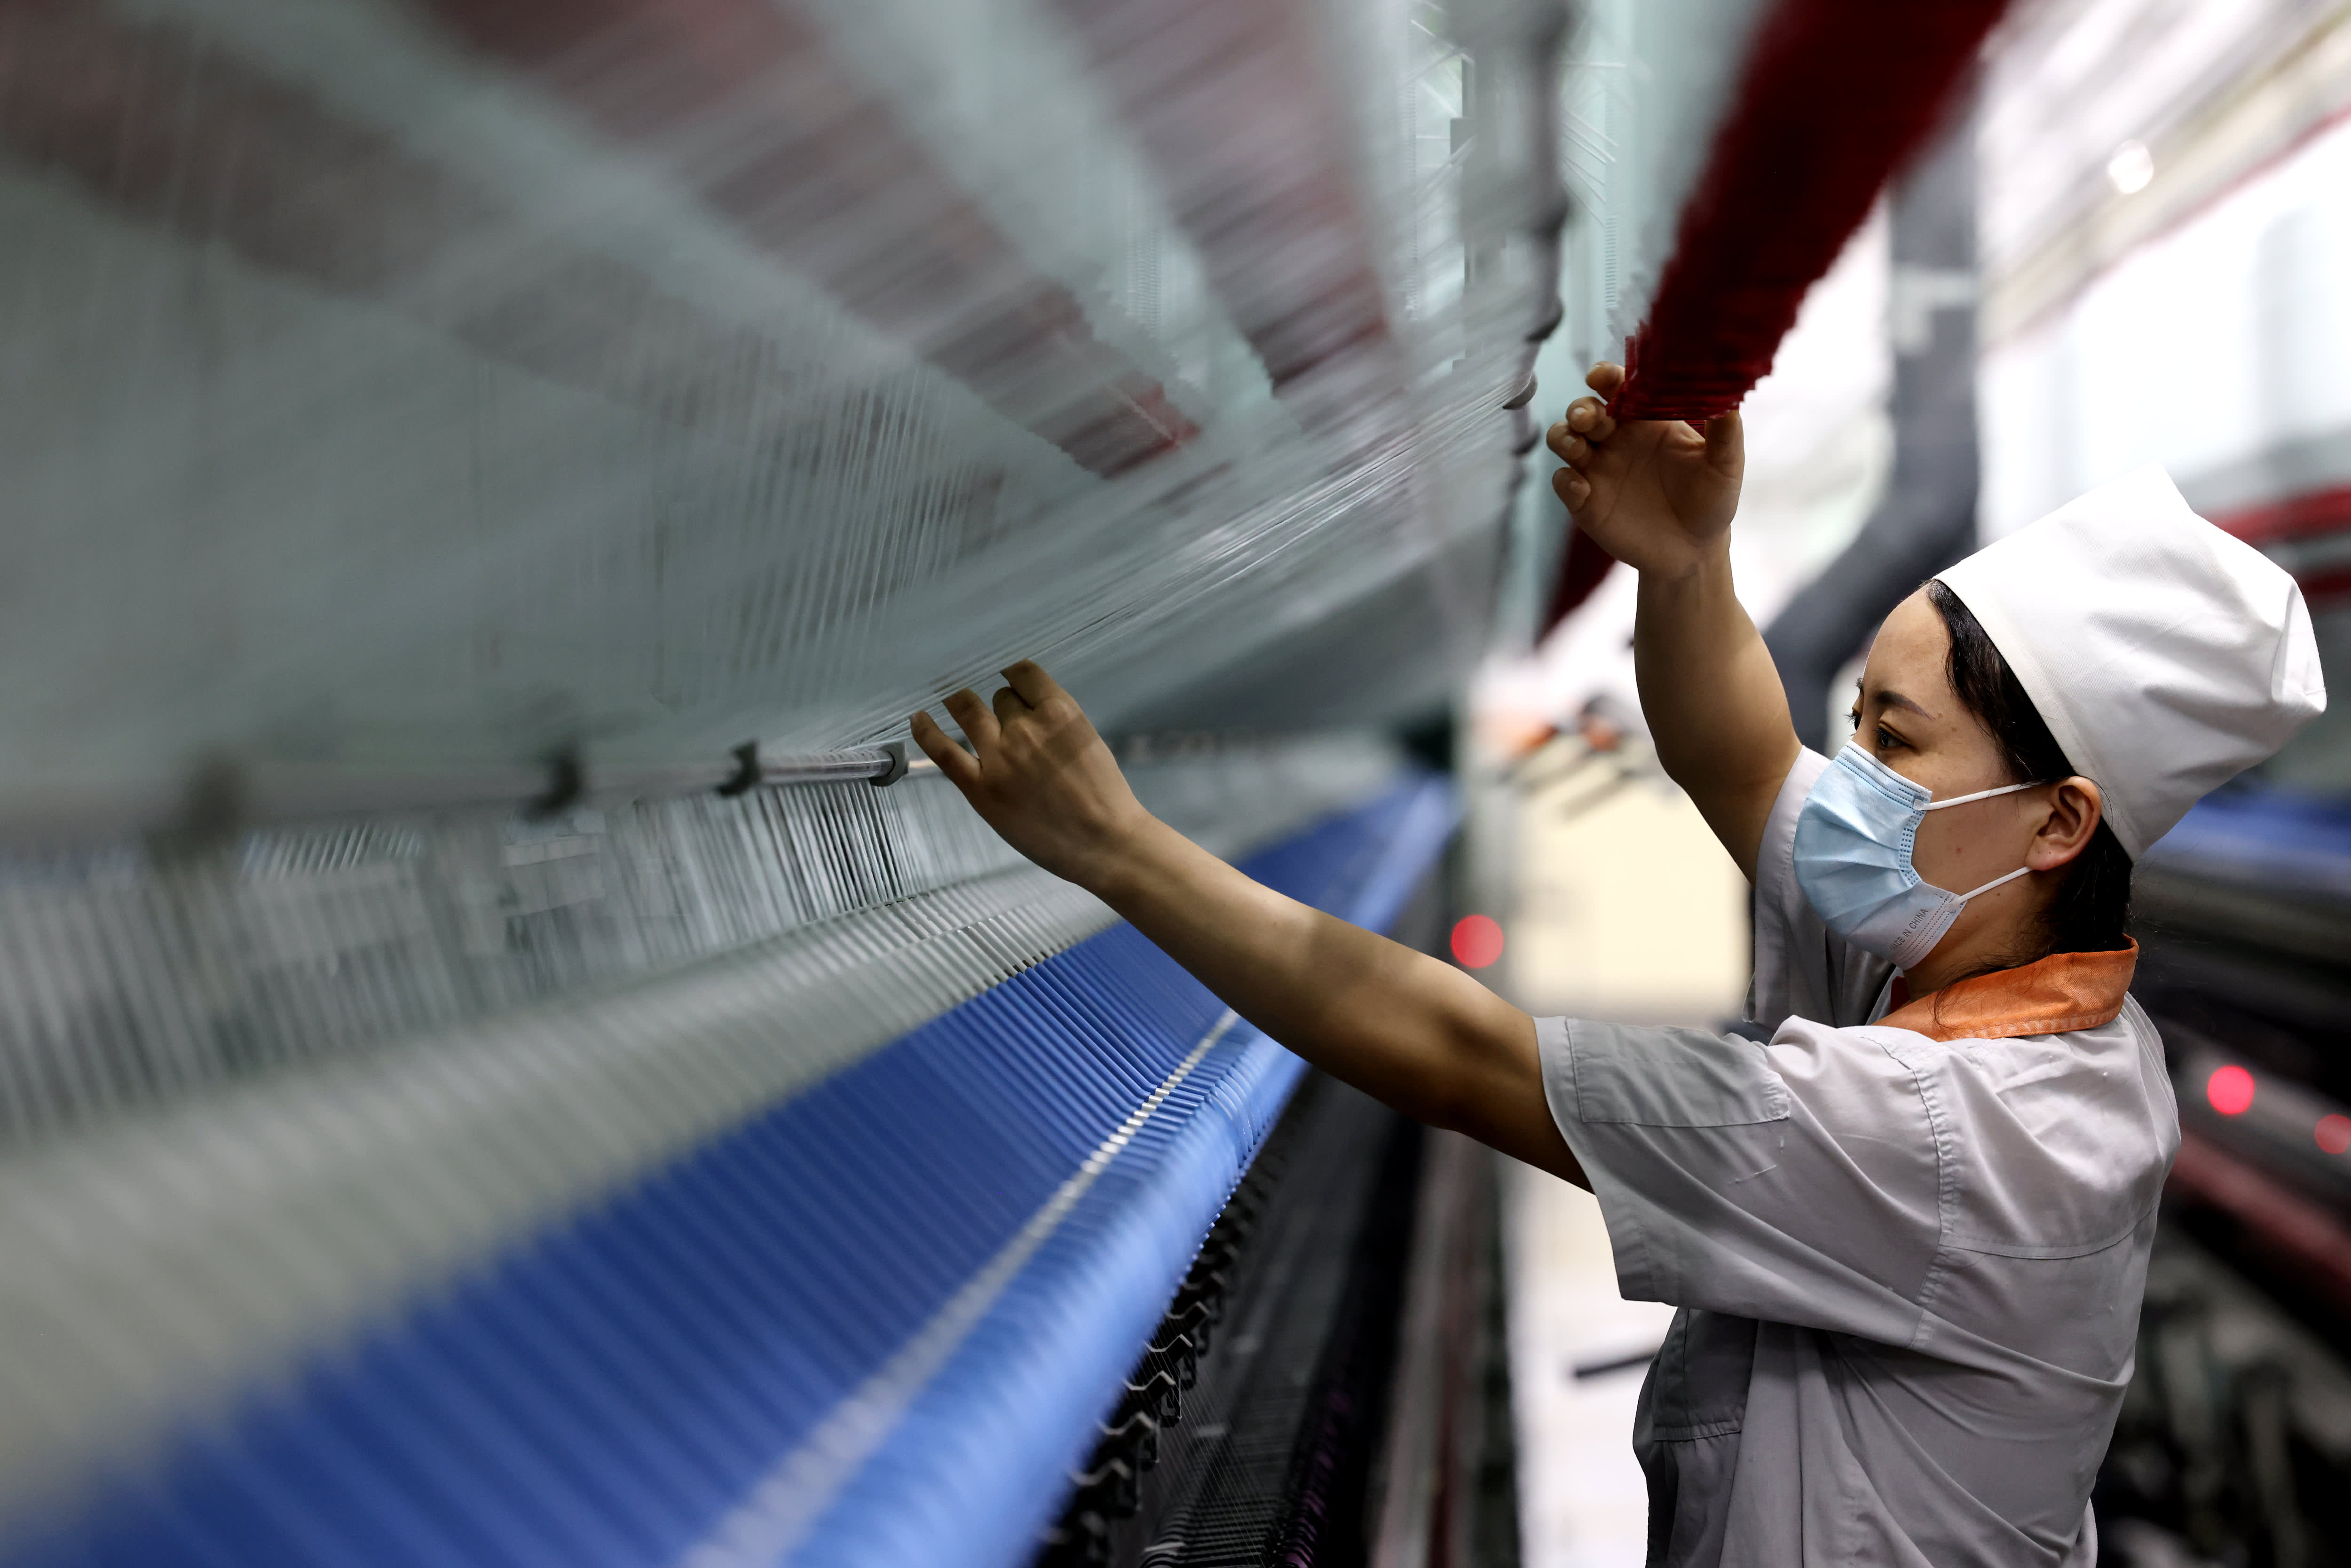 Factory activity in China is growing further, posting its highest reading in nearly 11 years